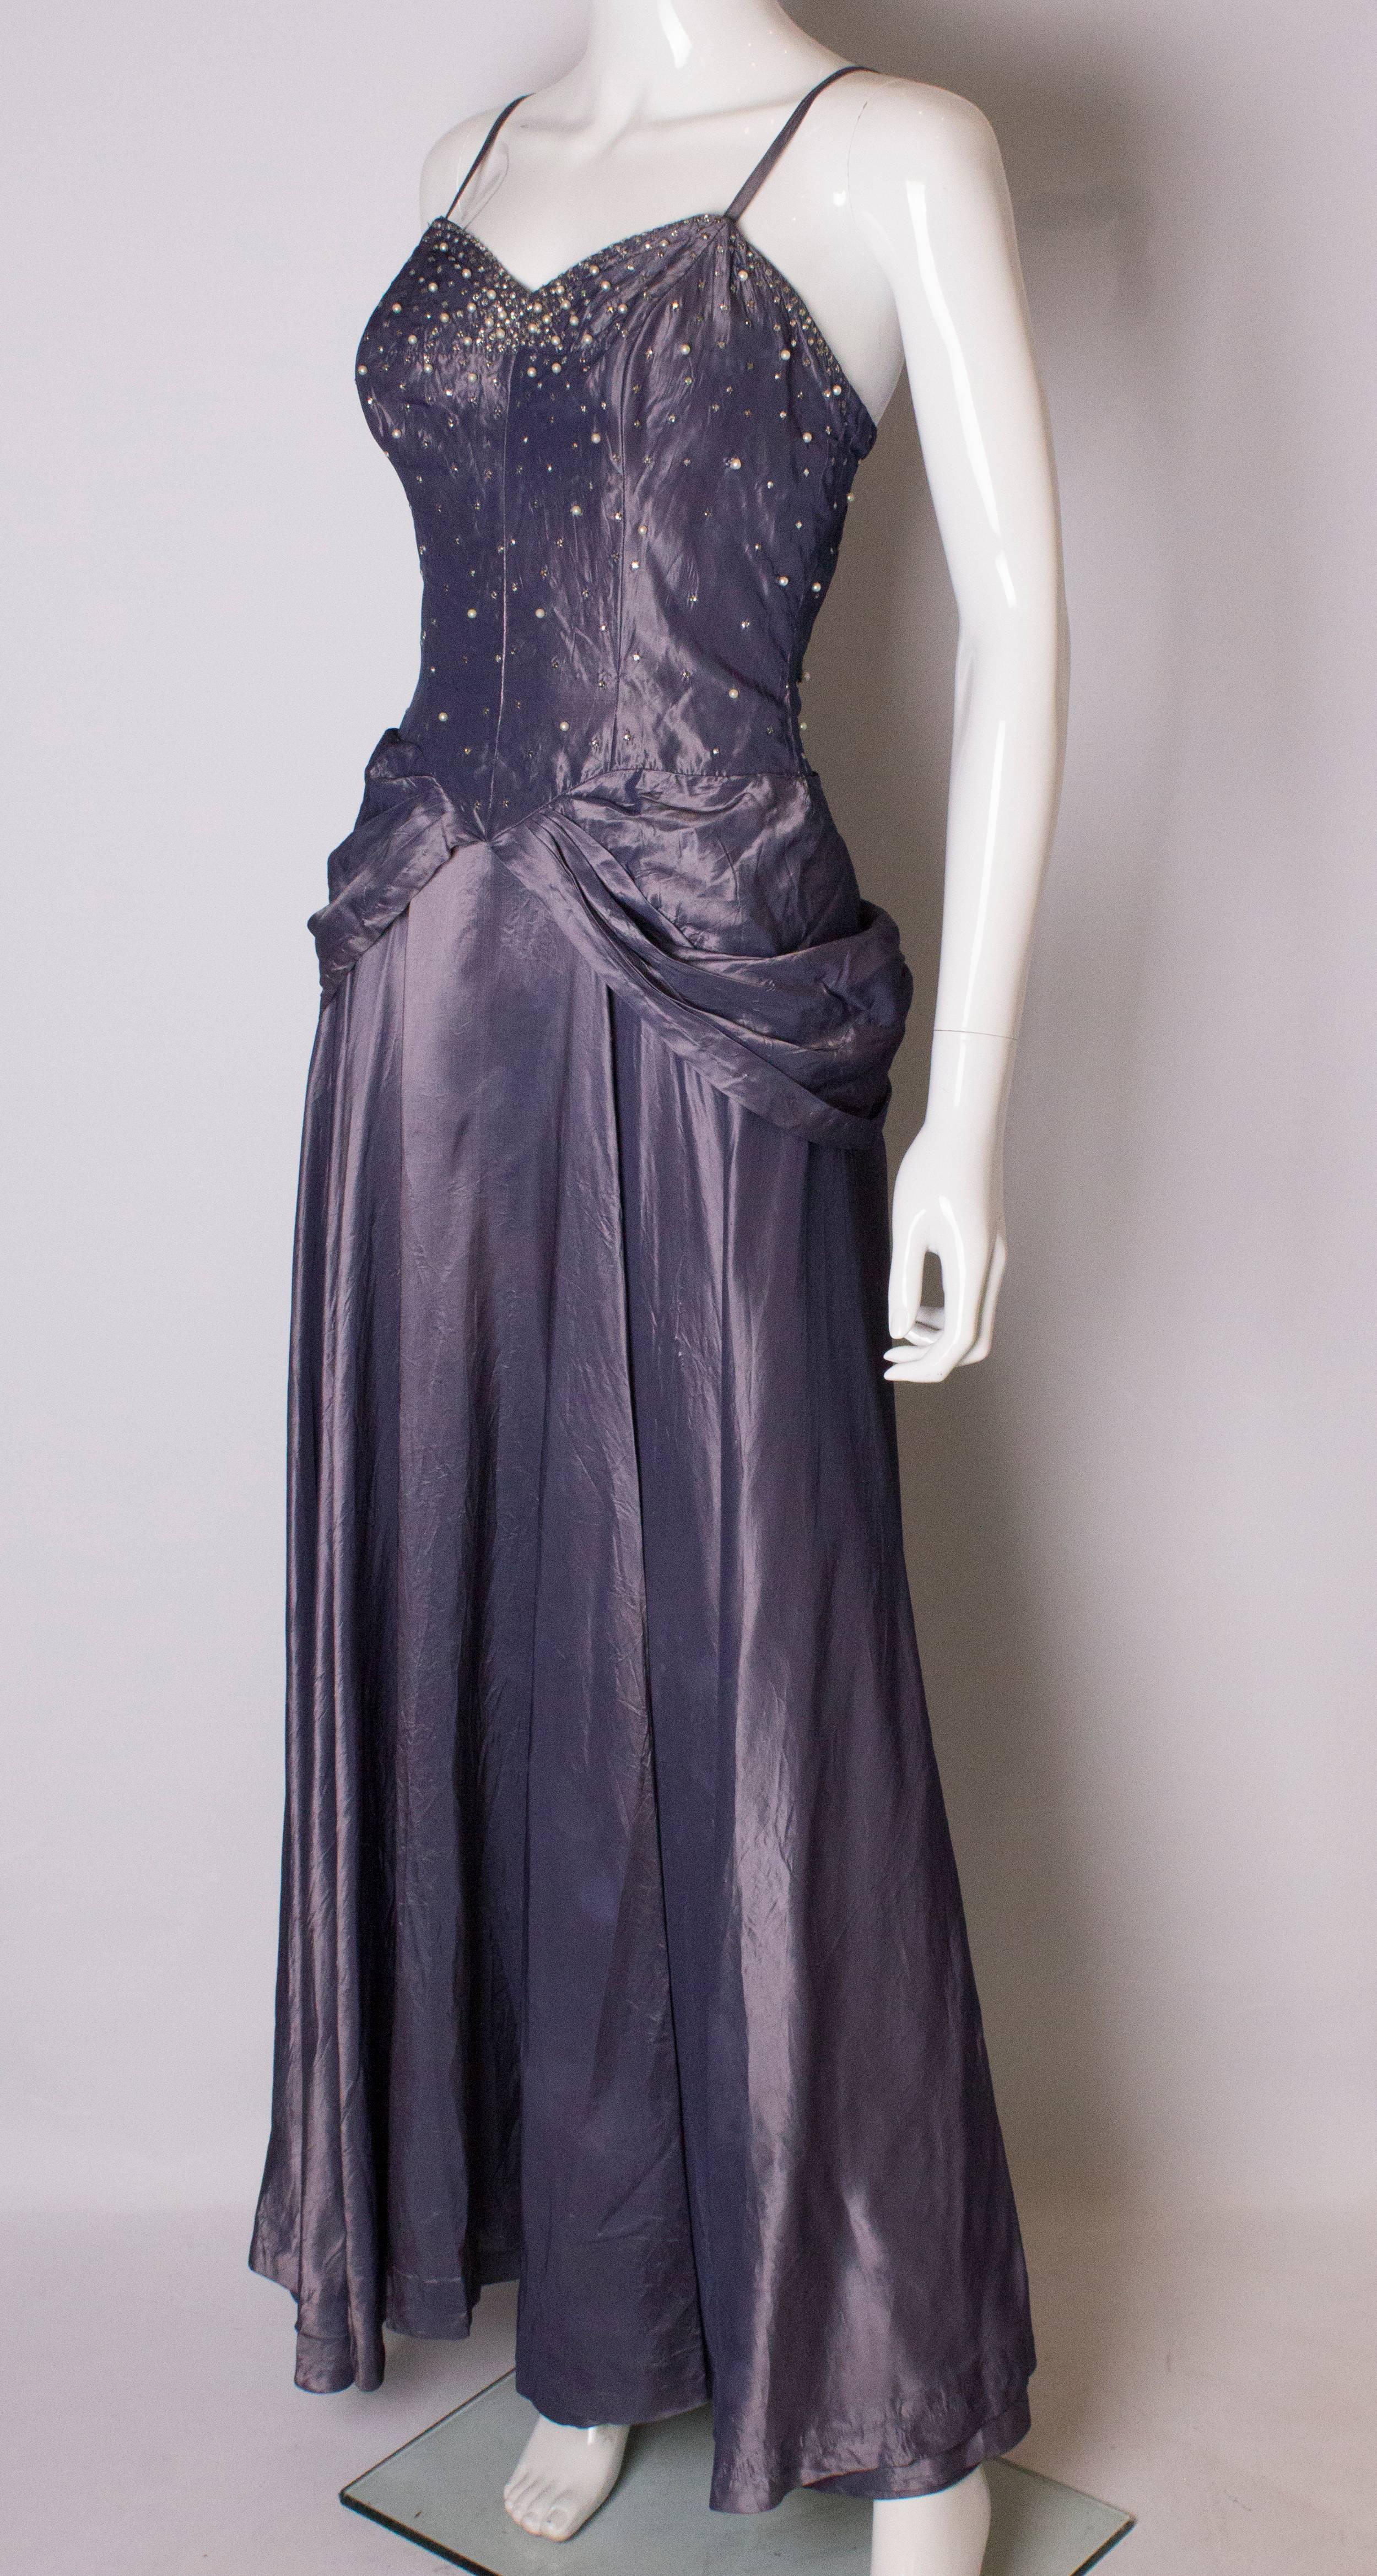 Women's A vintage 1940s lilac satin and diamante Robert Goldberg Evening Gown